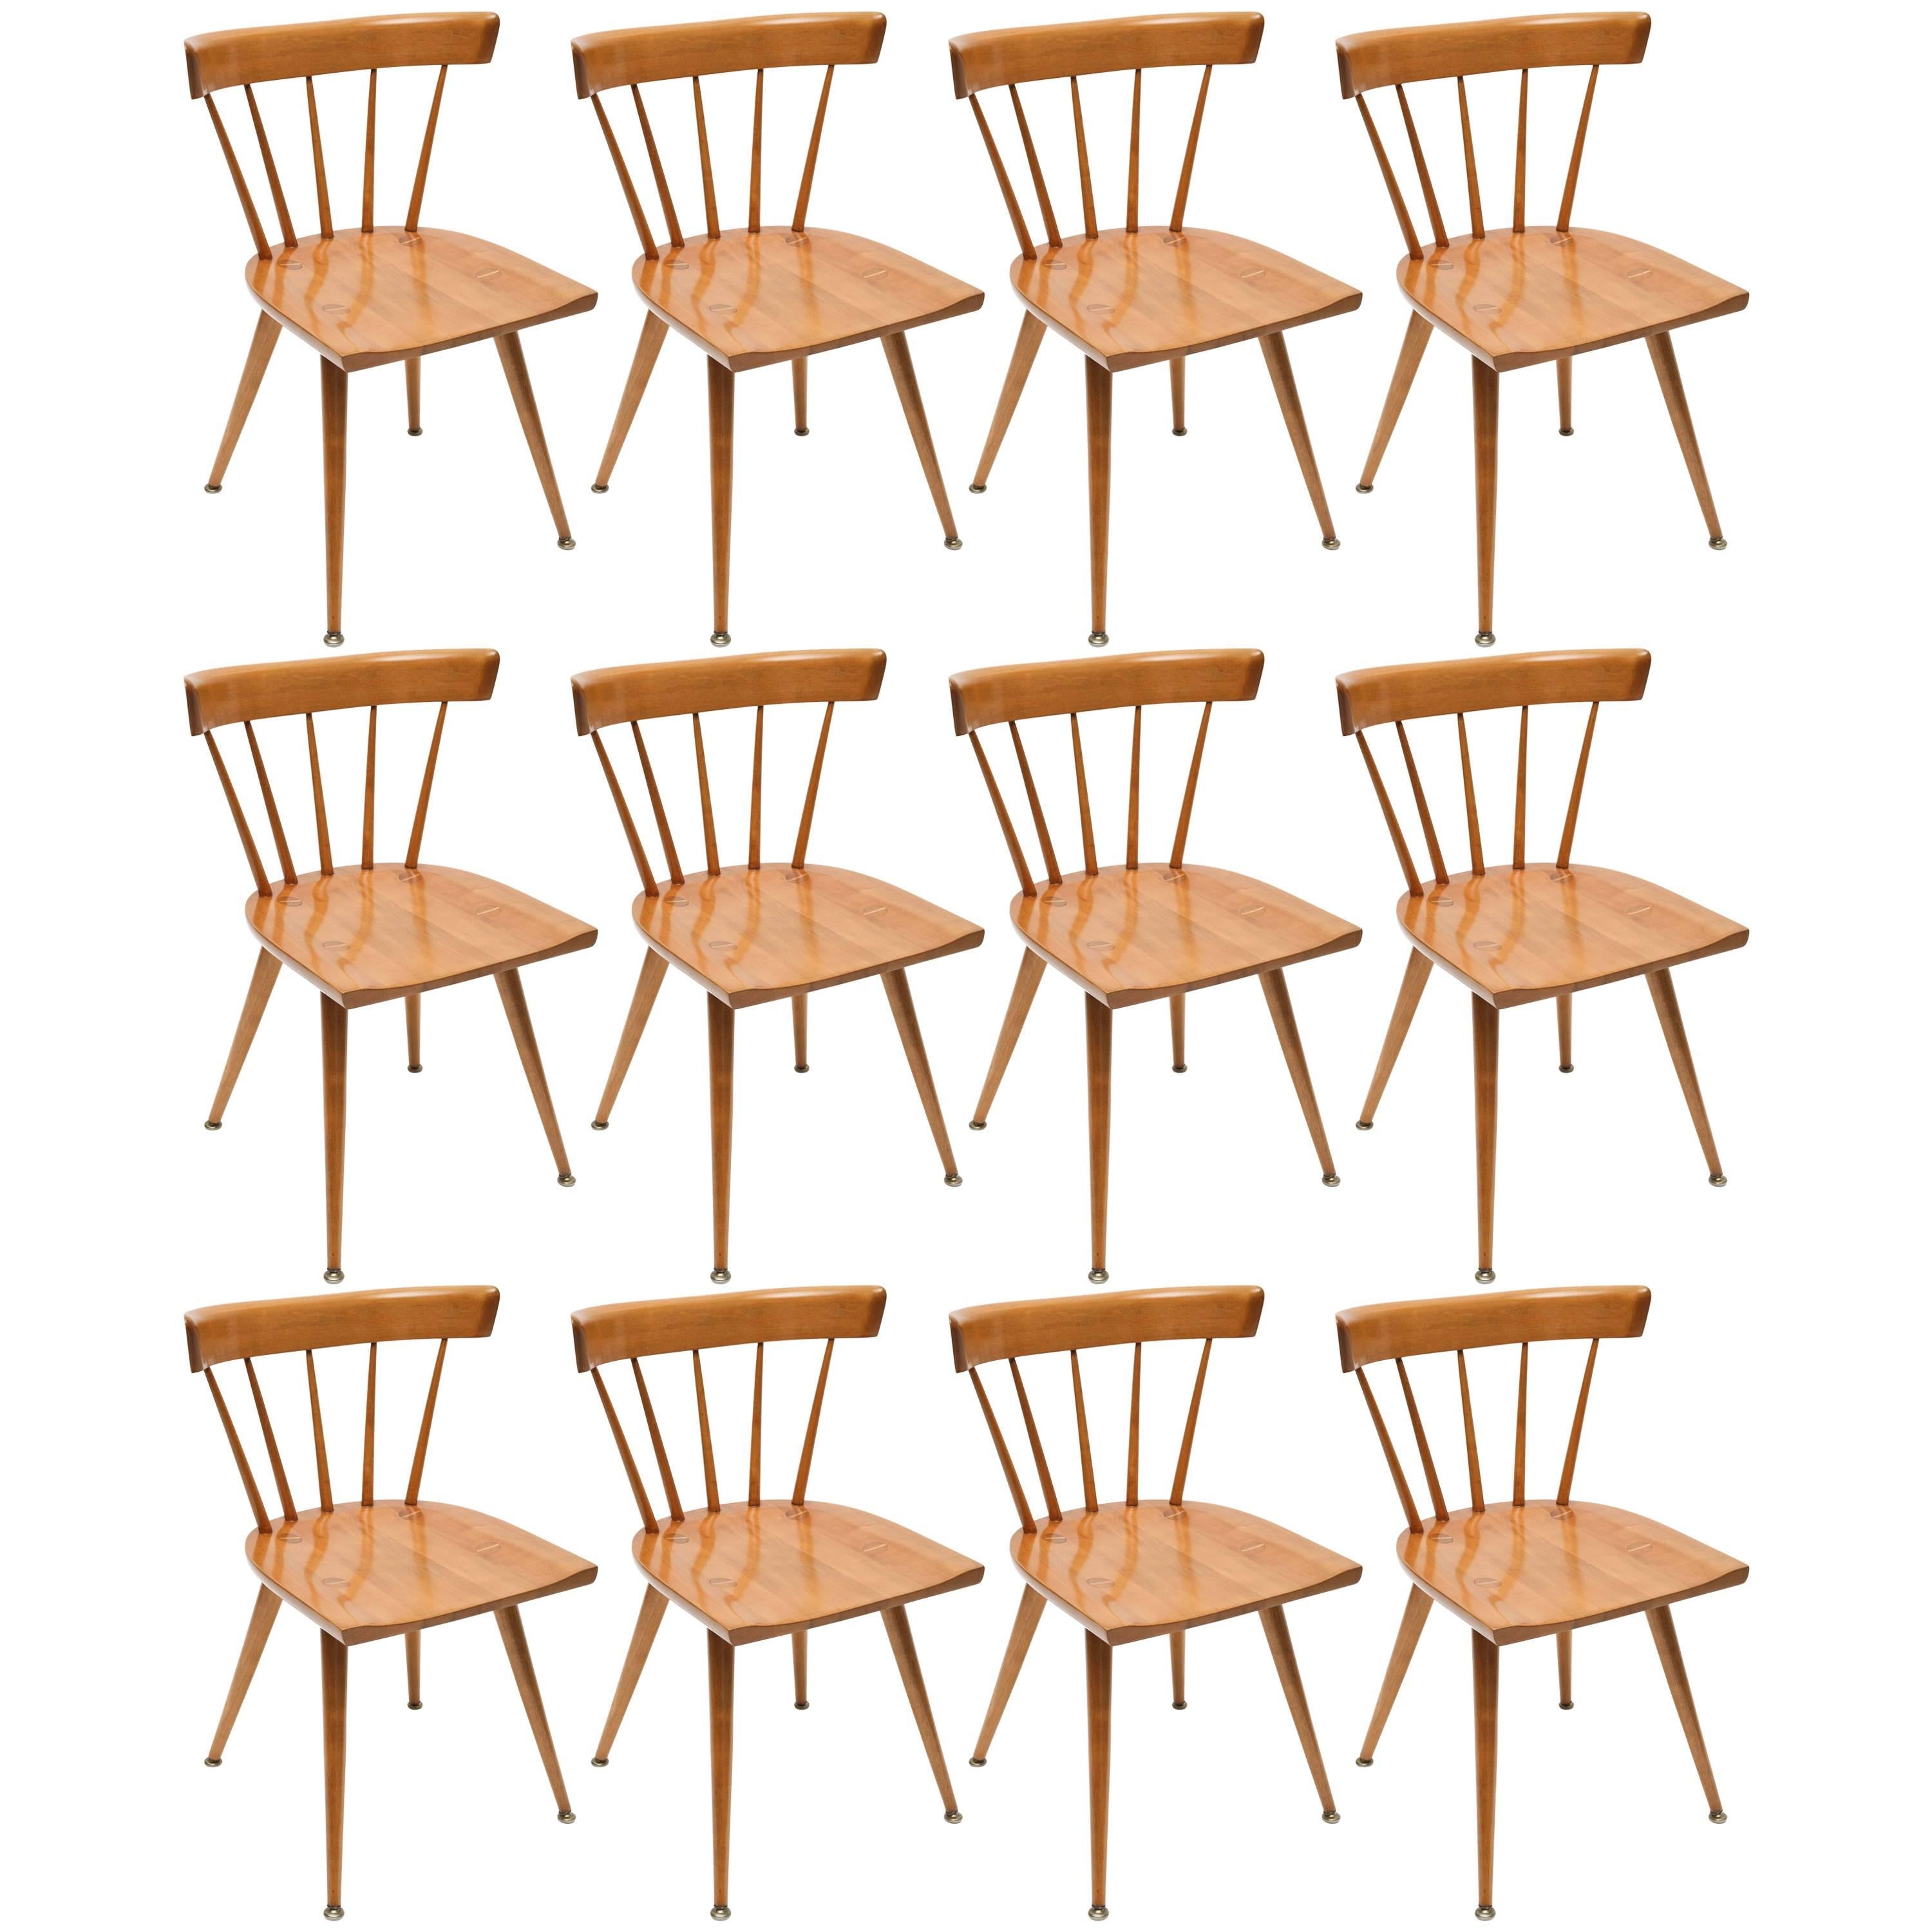 Set of 8 Paul McCobb Screw Planner Series Dining Chairs, 1950s, USA